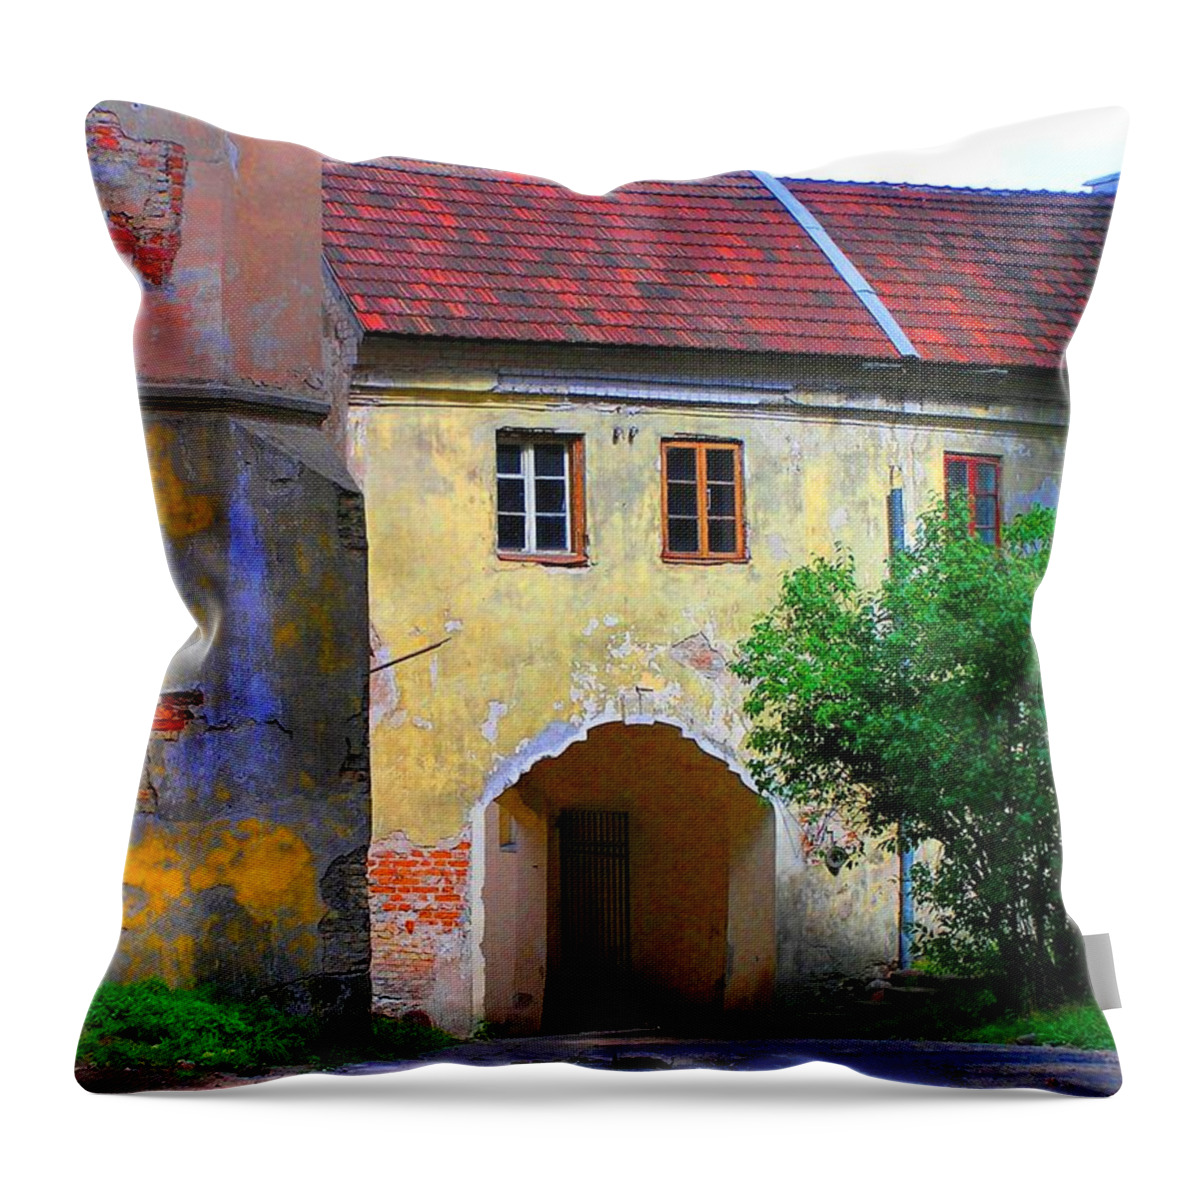 Old City Throw Pillow featuring the photograph Old City by Oleg Zavarzin